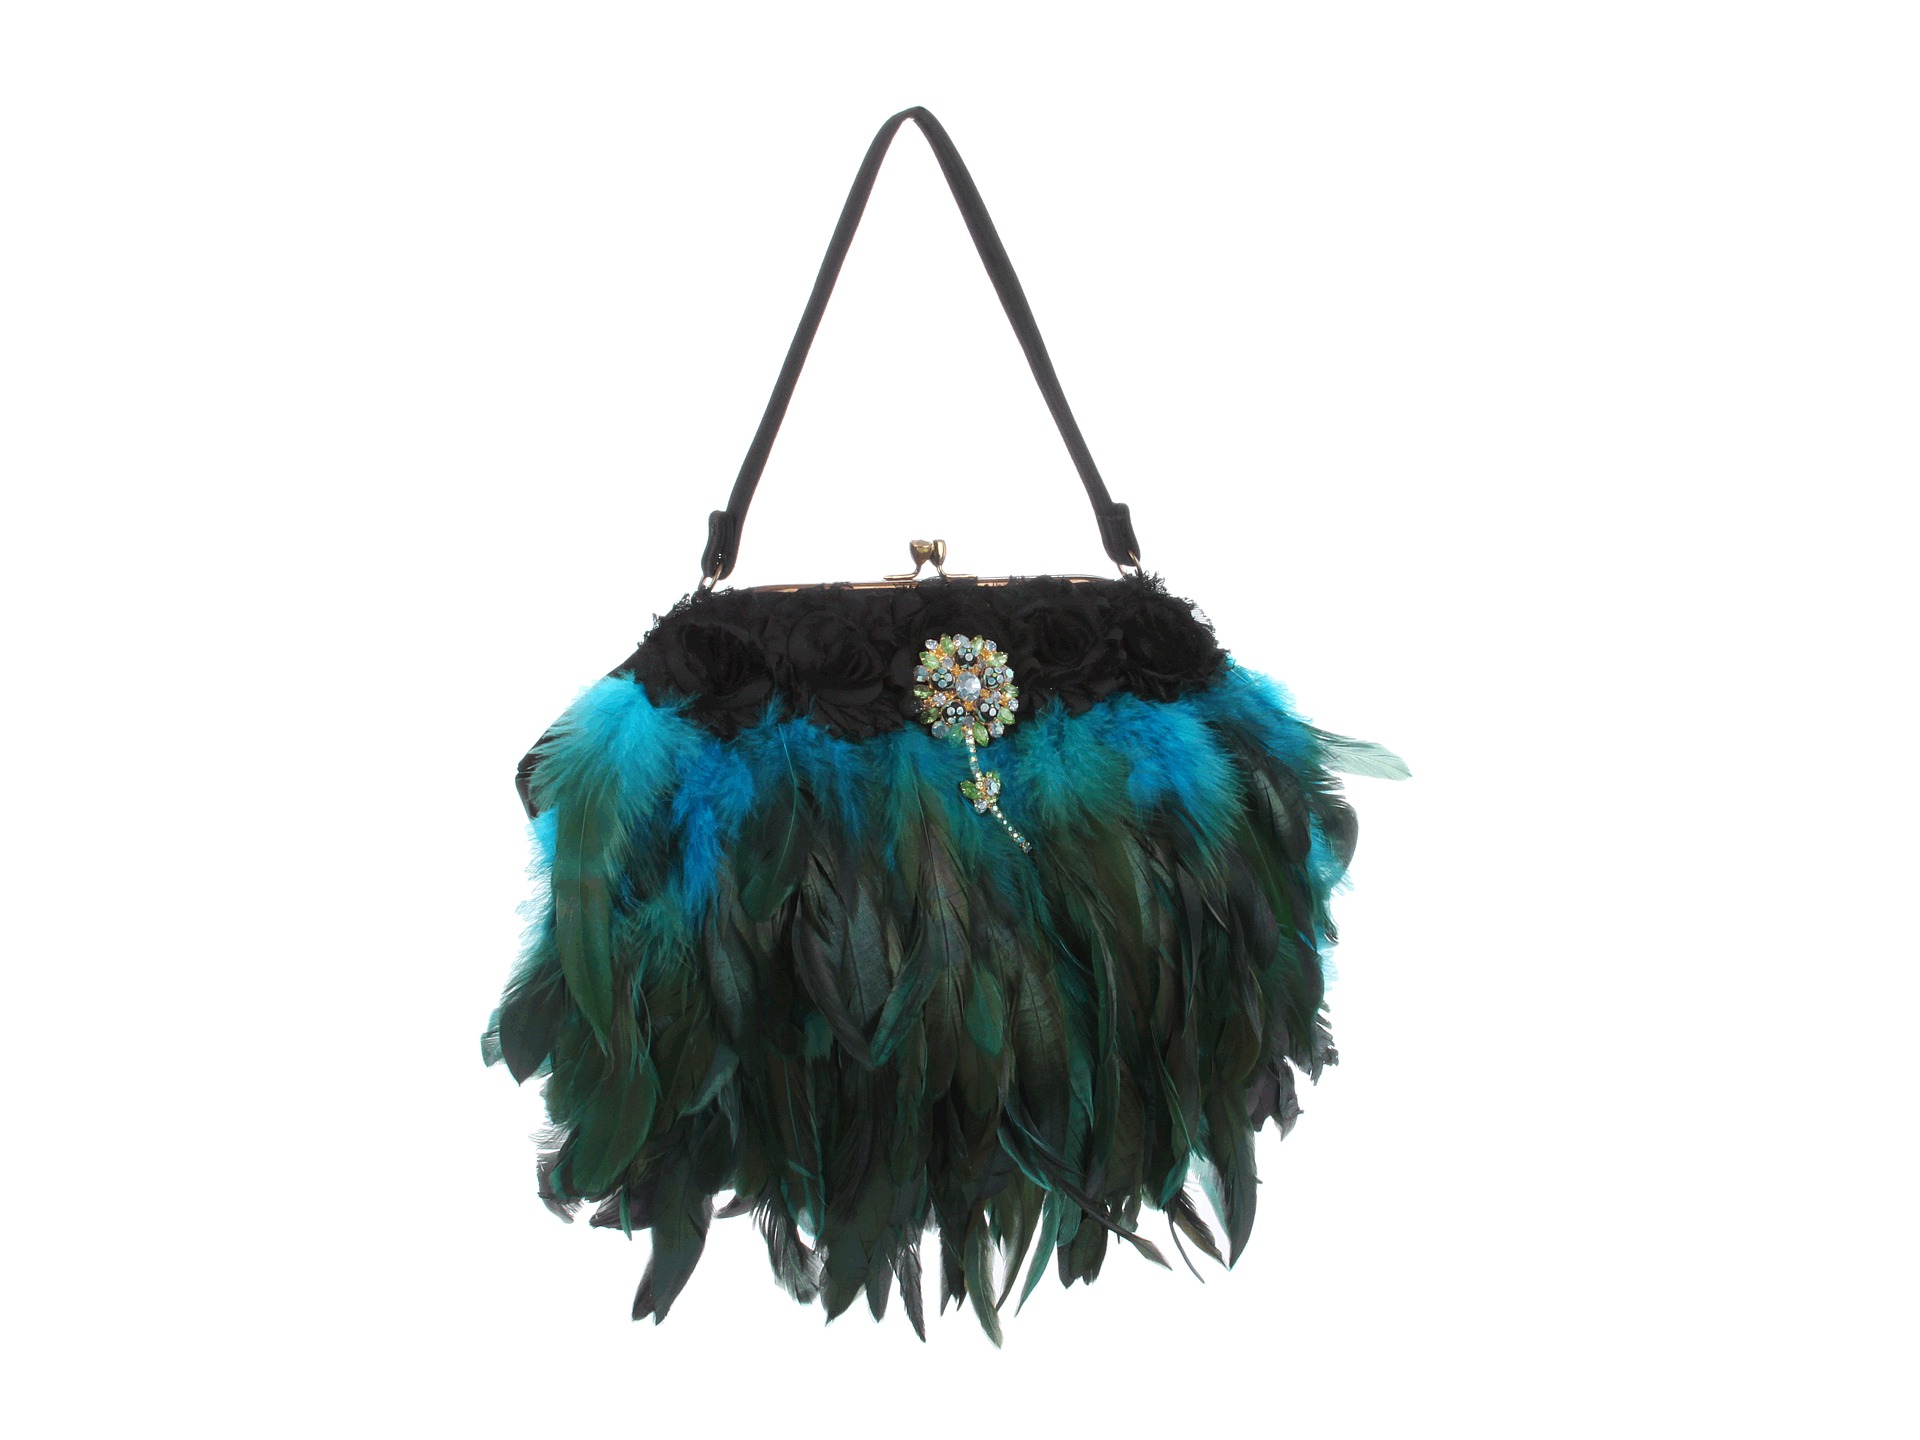 Inspired by Claire Jane   Peacock Feather Purse